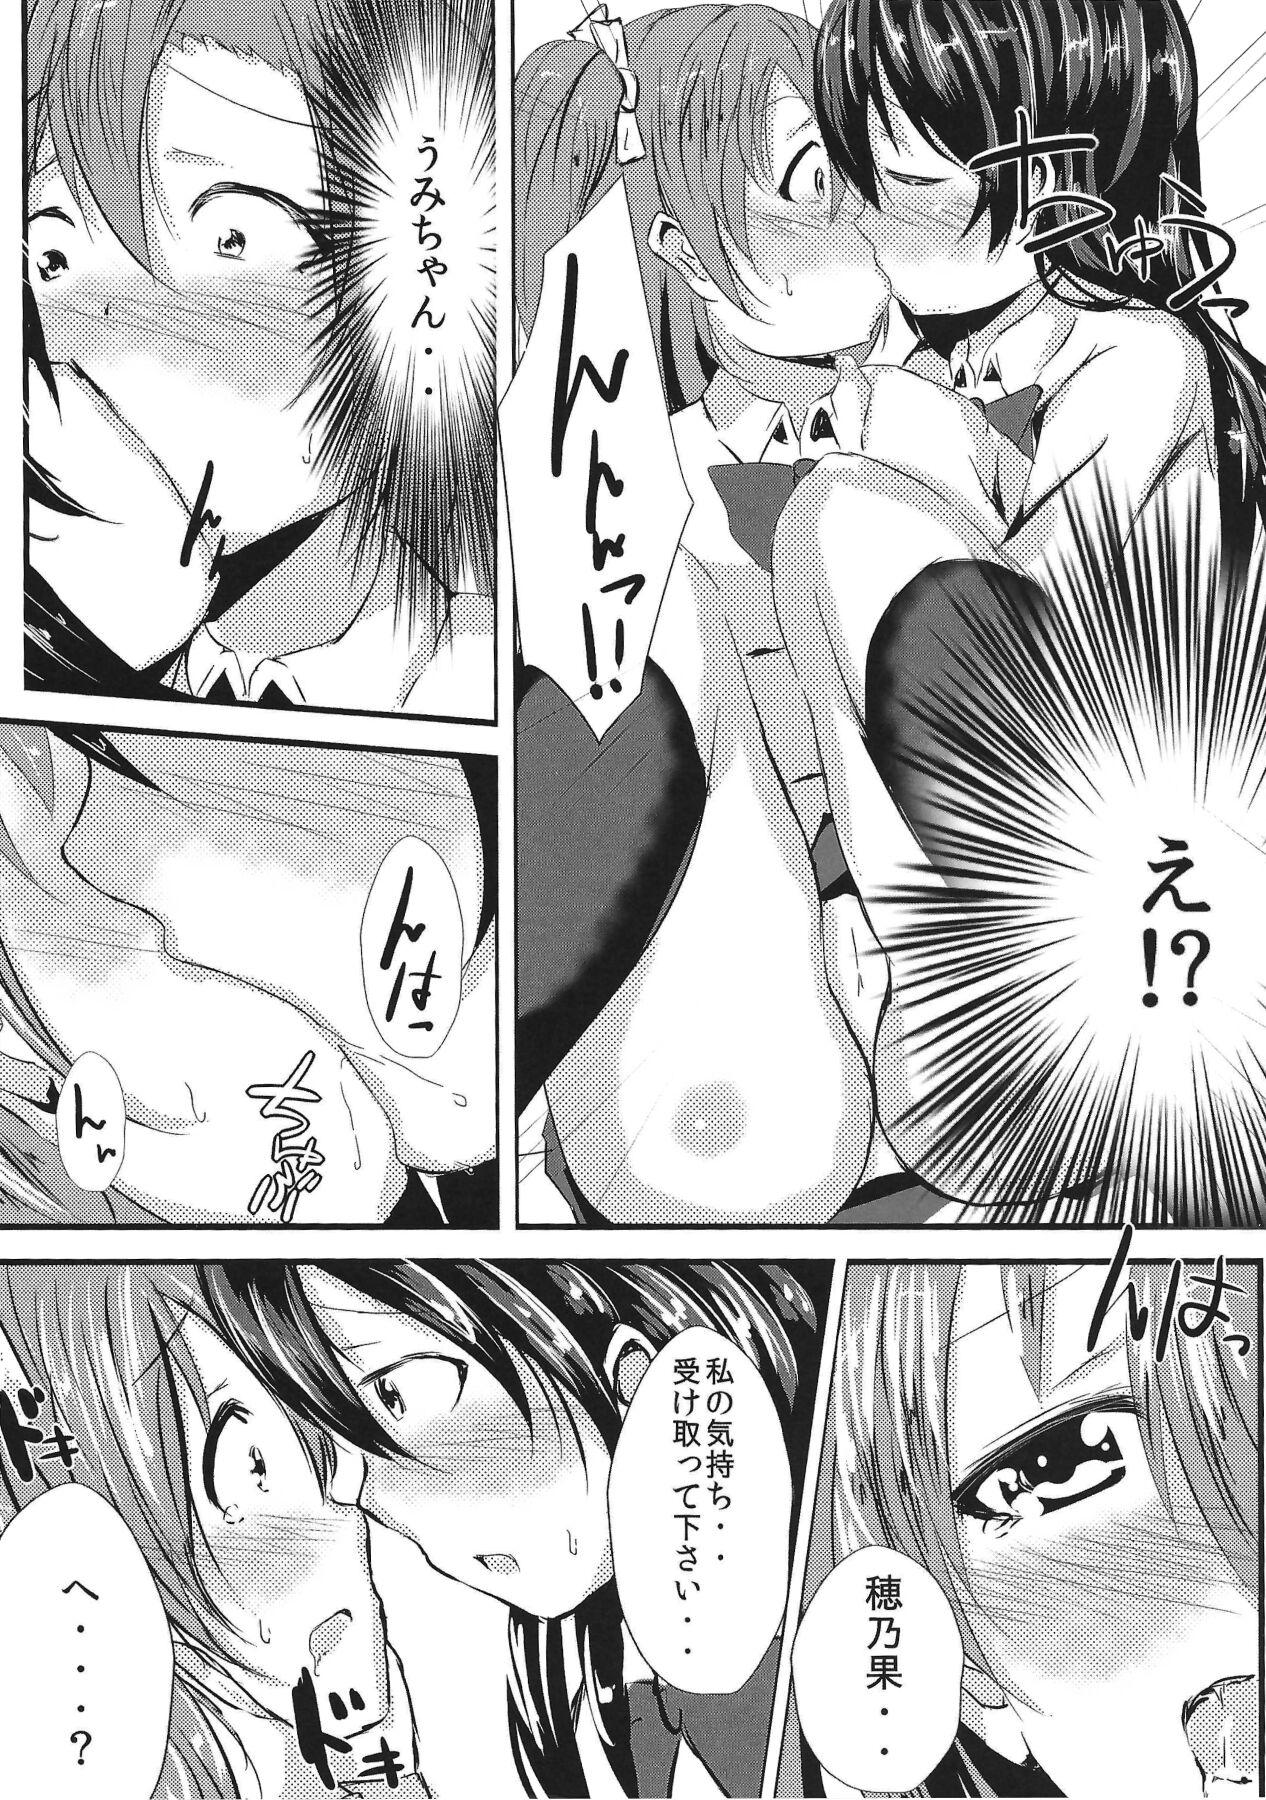 Pounded LOVE!LOVE!FESTIVAL!! 2 - Love live Clothed - Page 7